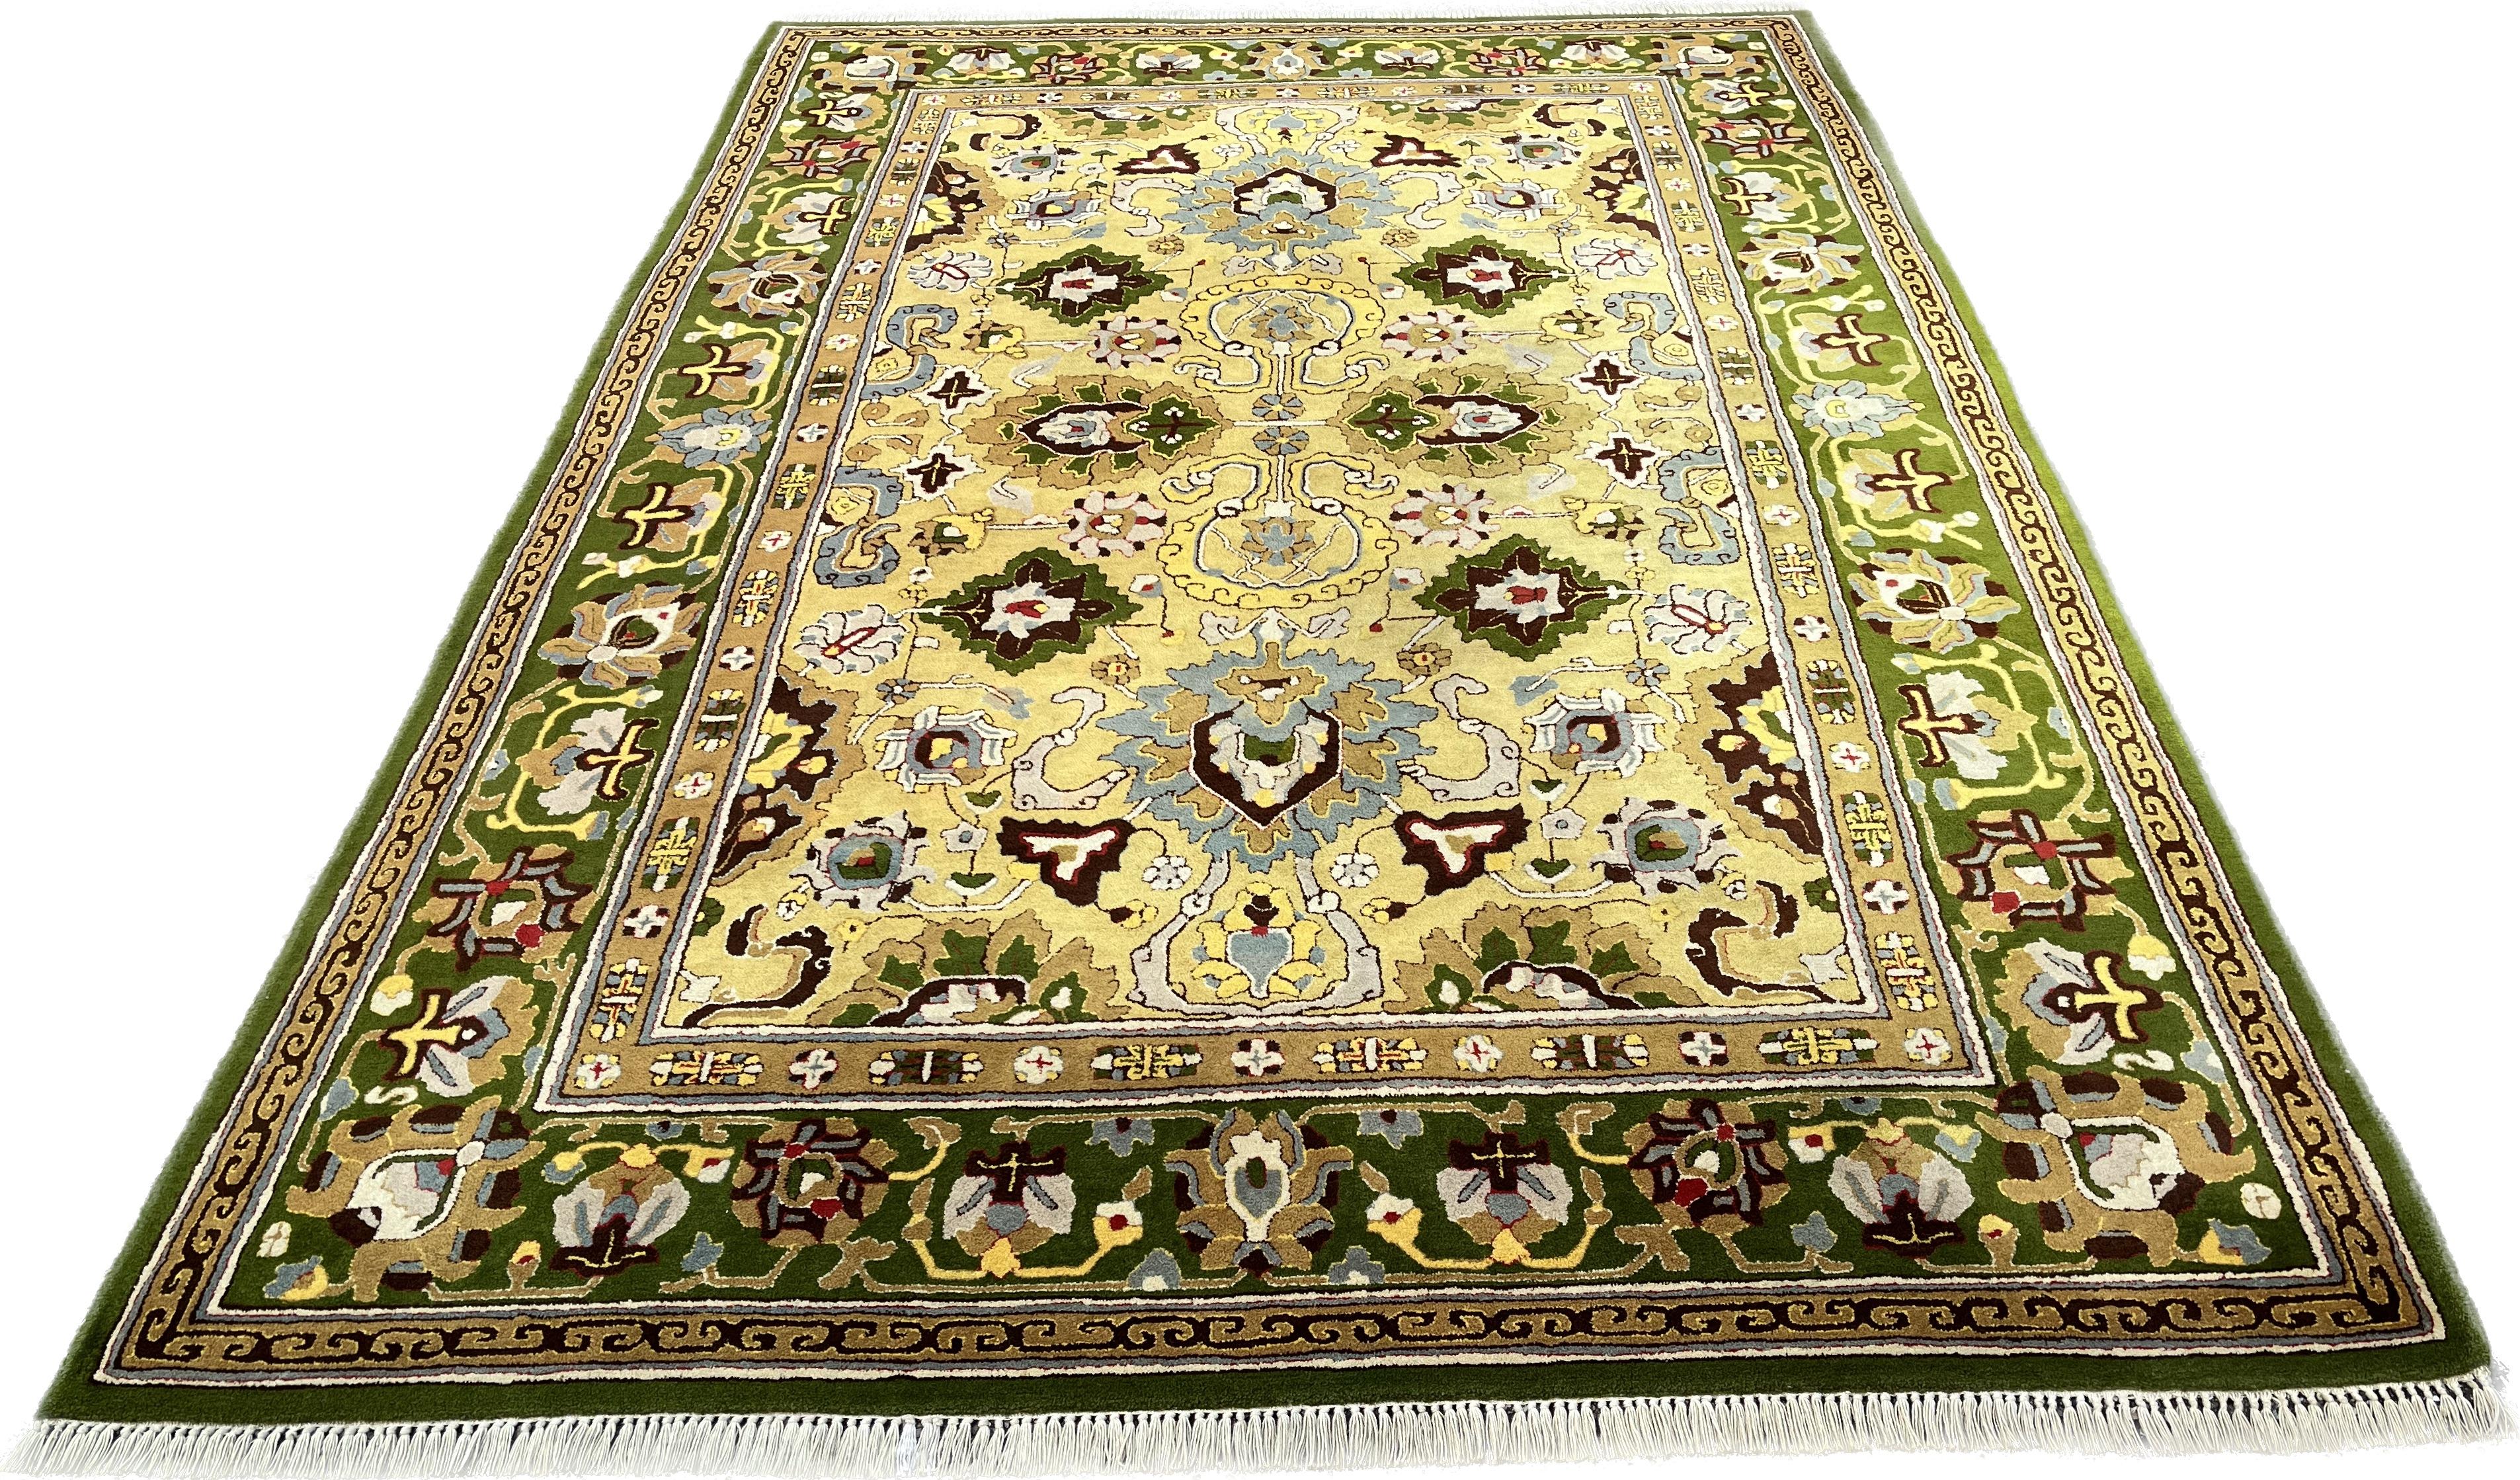 Hand-Knotted European Design Carpet From The Safavid Empire